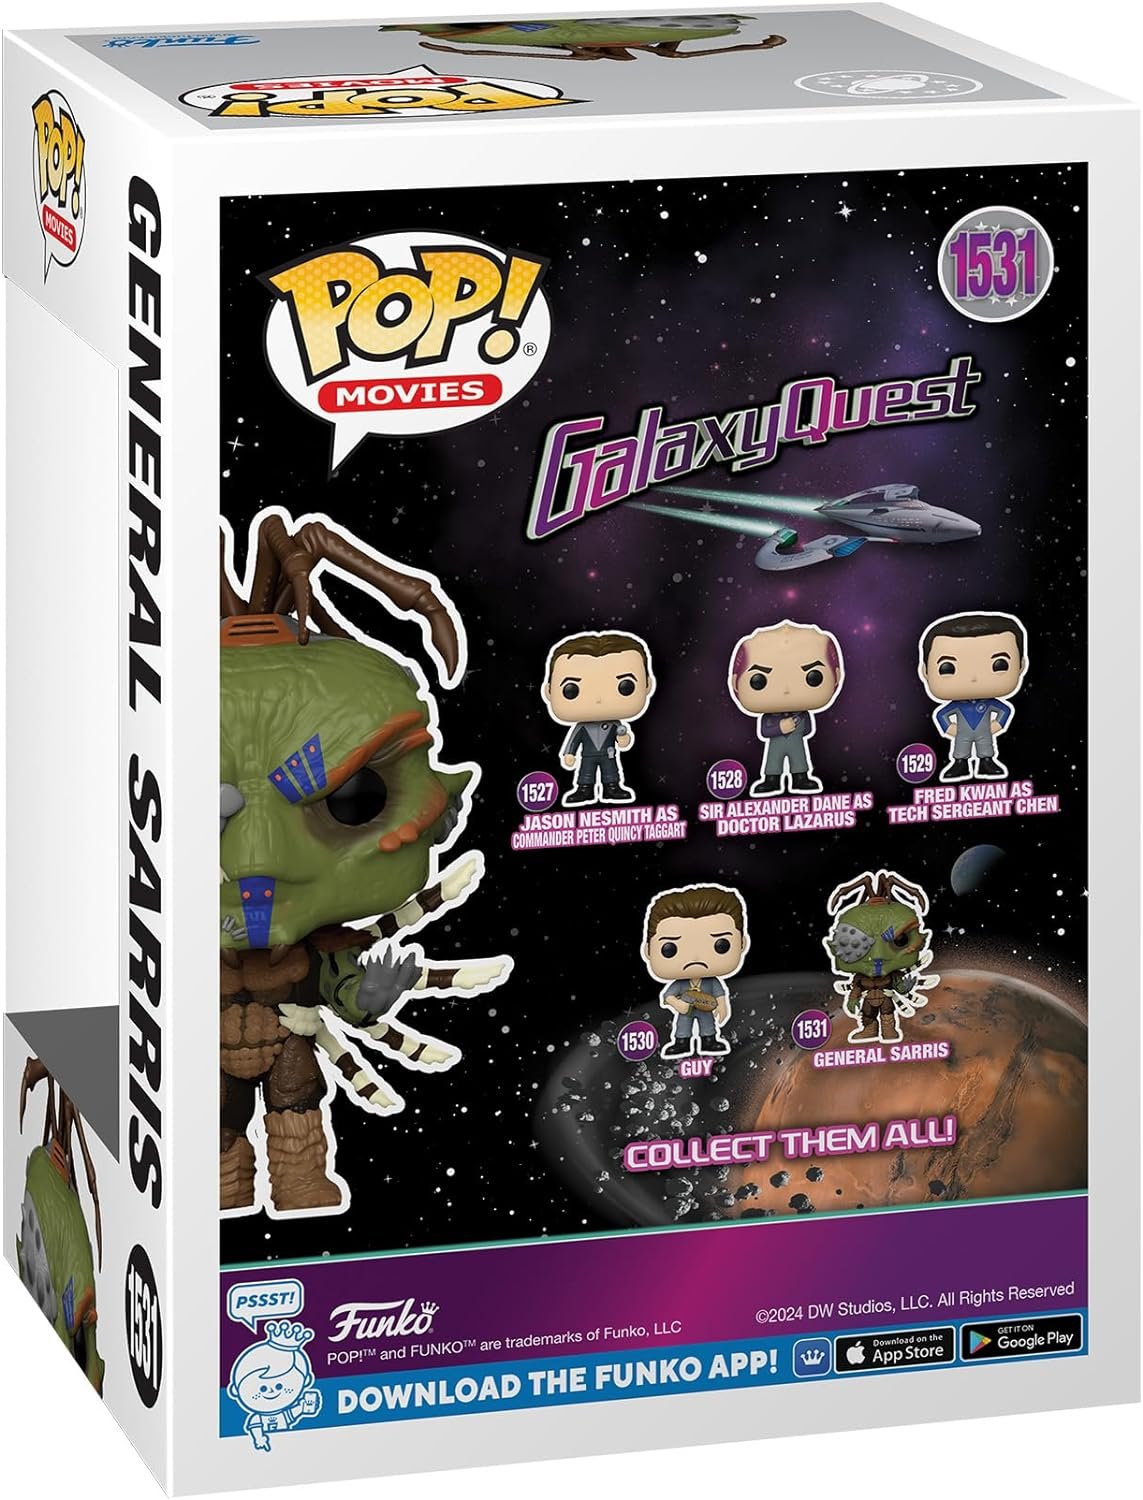 Funko POP! Movies: Galaxy Quest – Sarris - Collectable Vinyl Figure - Official Merchandise - Toys for Kids & Adults - Movies Fans - Model Figure for Collectors and Display